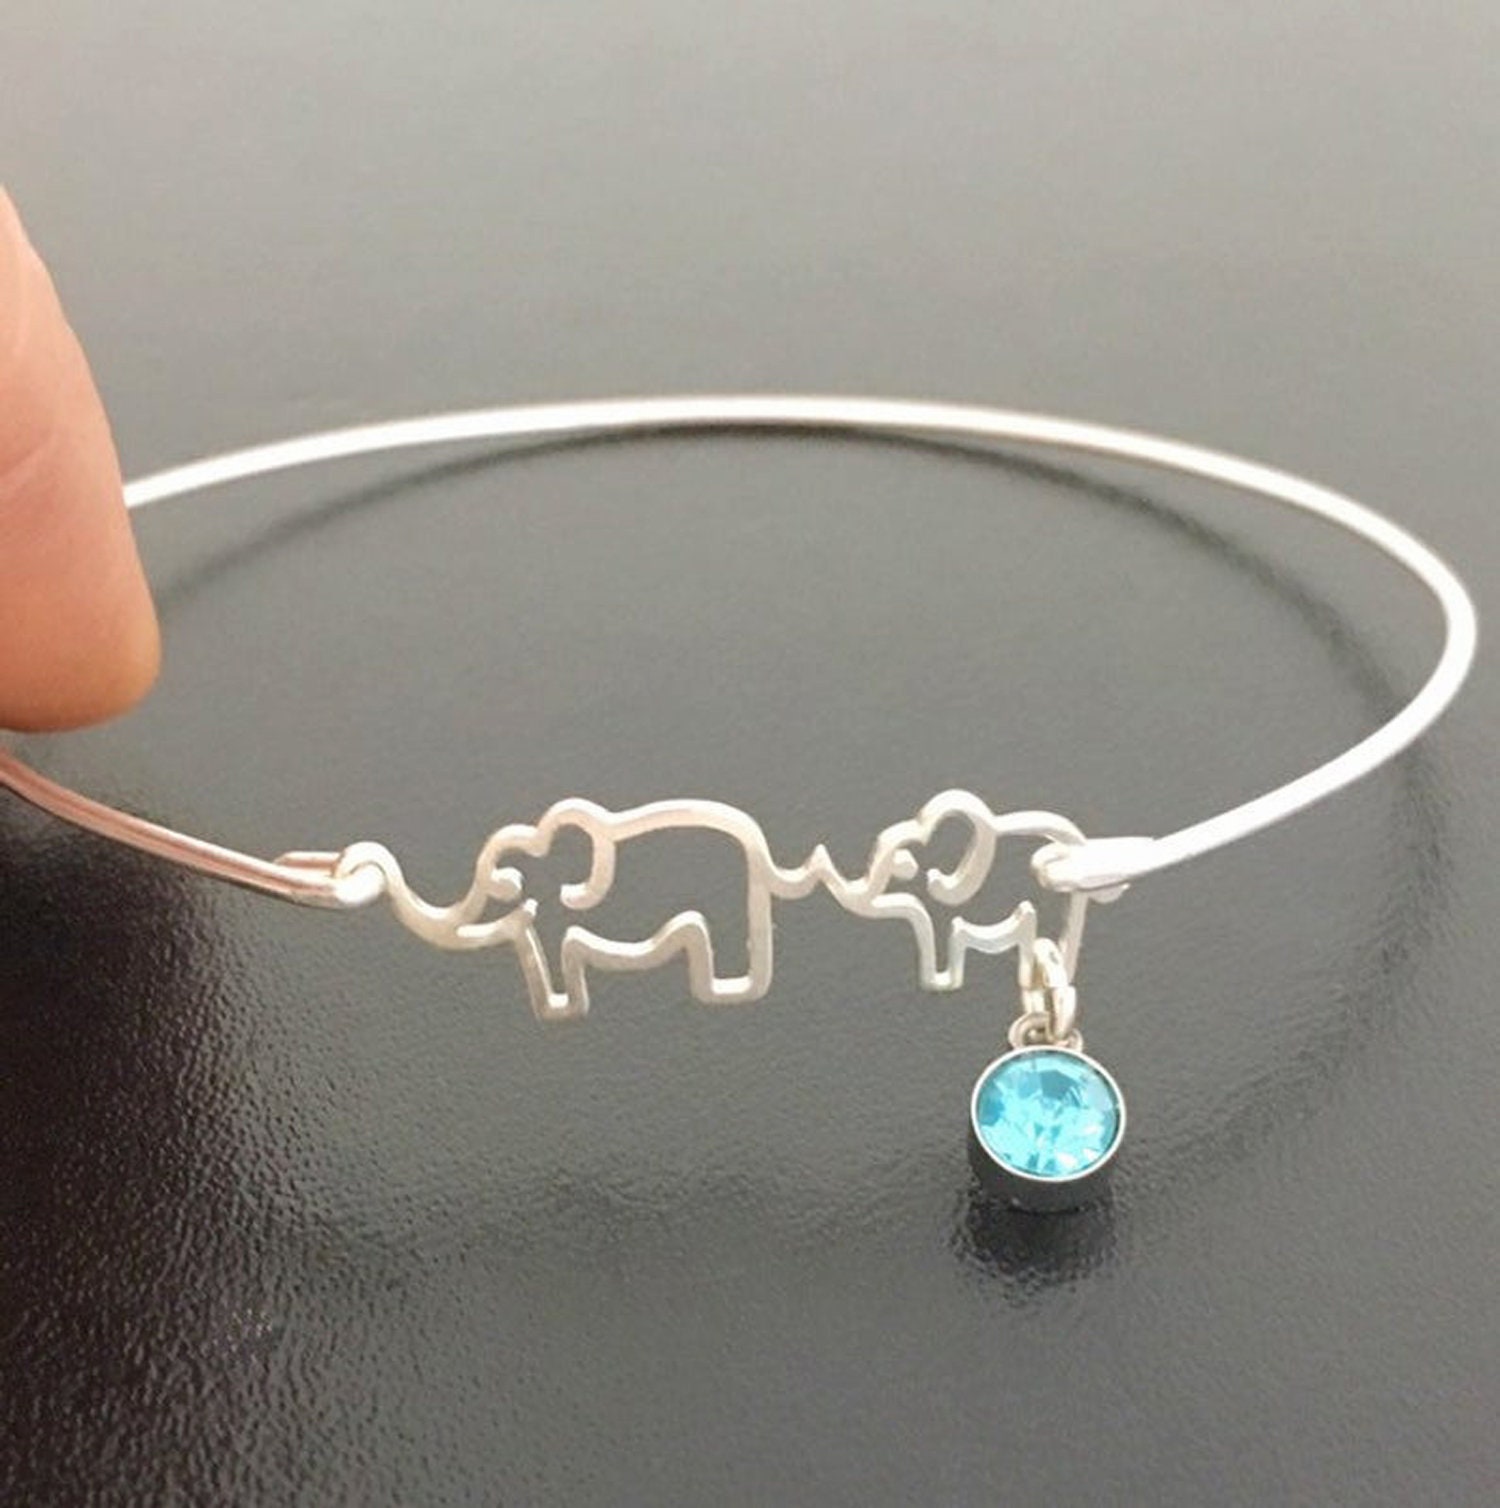 Very pretty Happy Birthday Auntie gift card with gorgeous silver Mother and Baby elephant charm bracelet